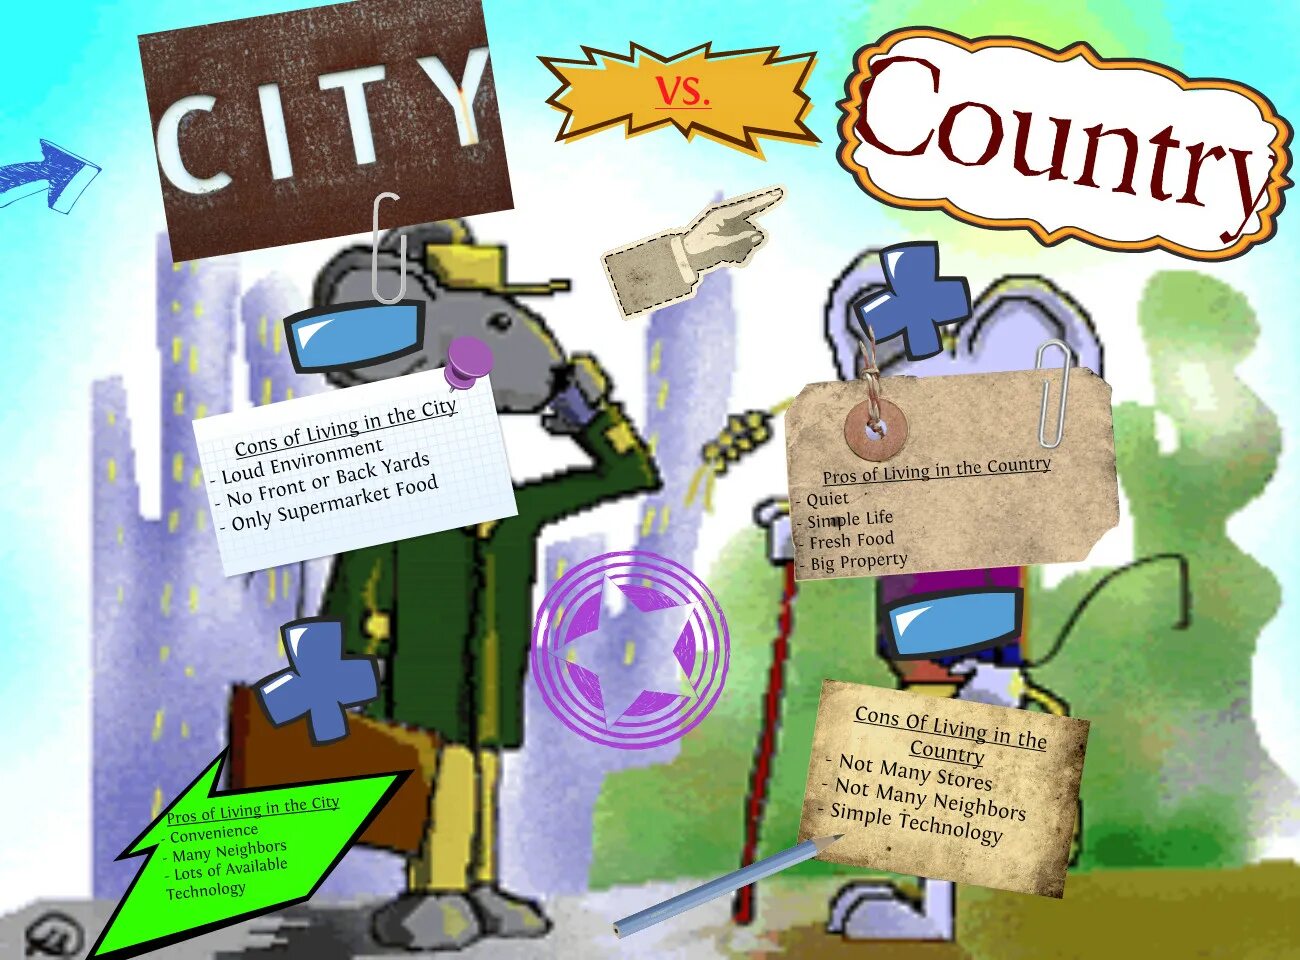 Country vs country. City Life and Country Life. Country vs City Life. City or Country Life. Living in the City or in the Country.